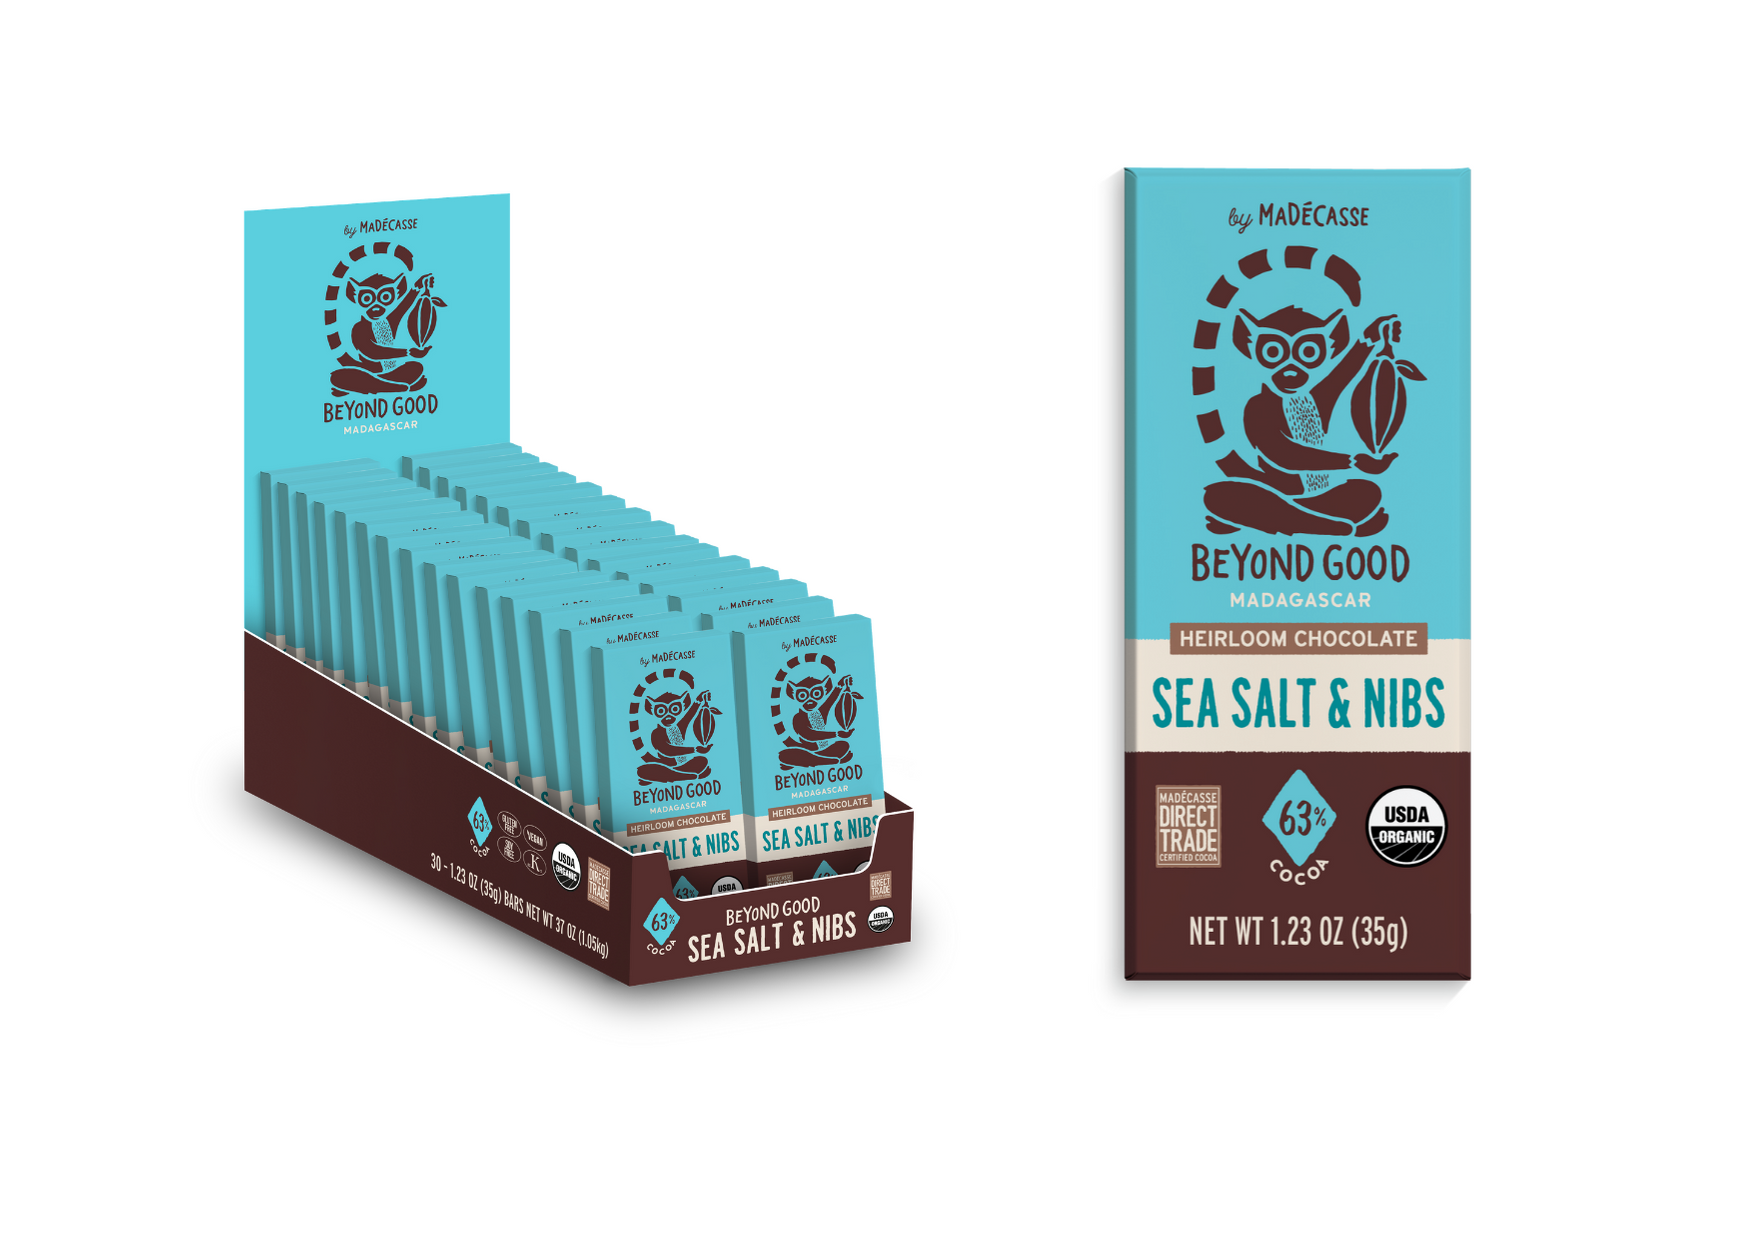 Beyond Good's award-winning Sea Salt & Nibs is now available in a convenient snack-sized 35g chocolate bar.